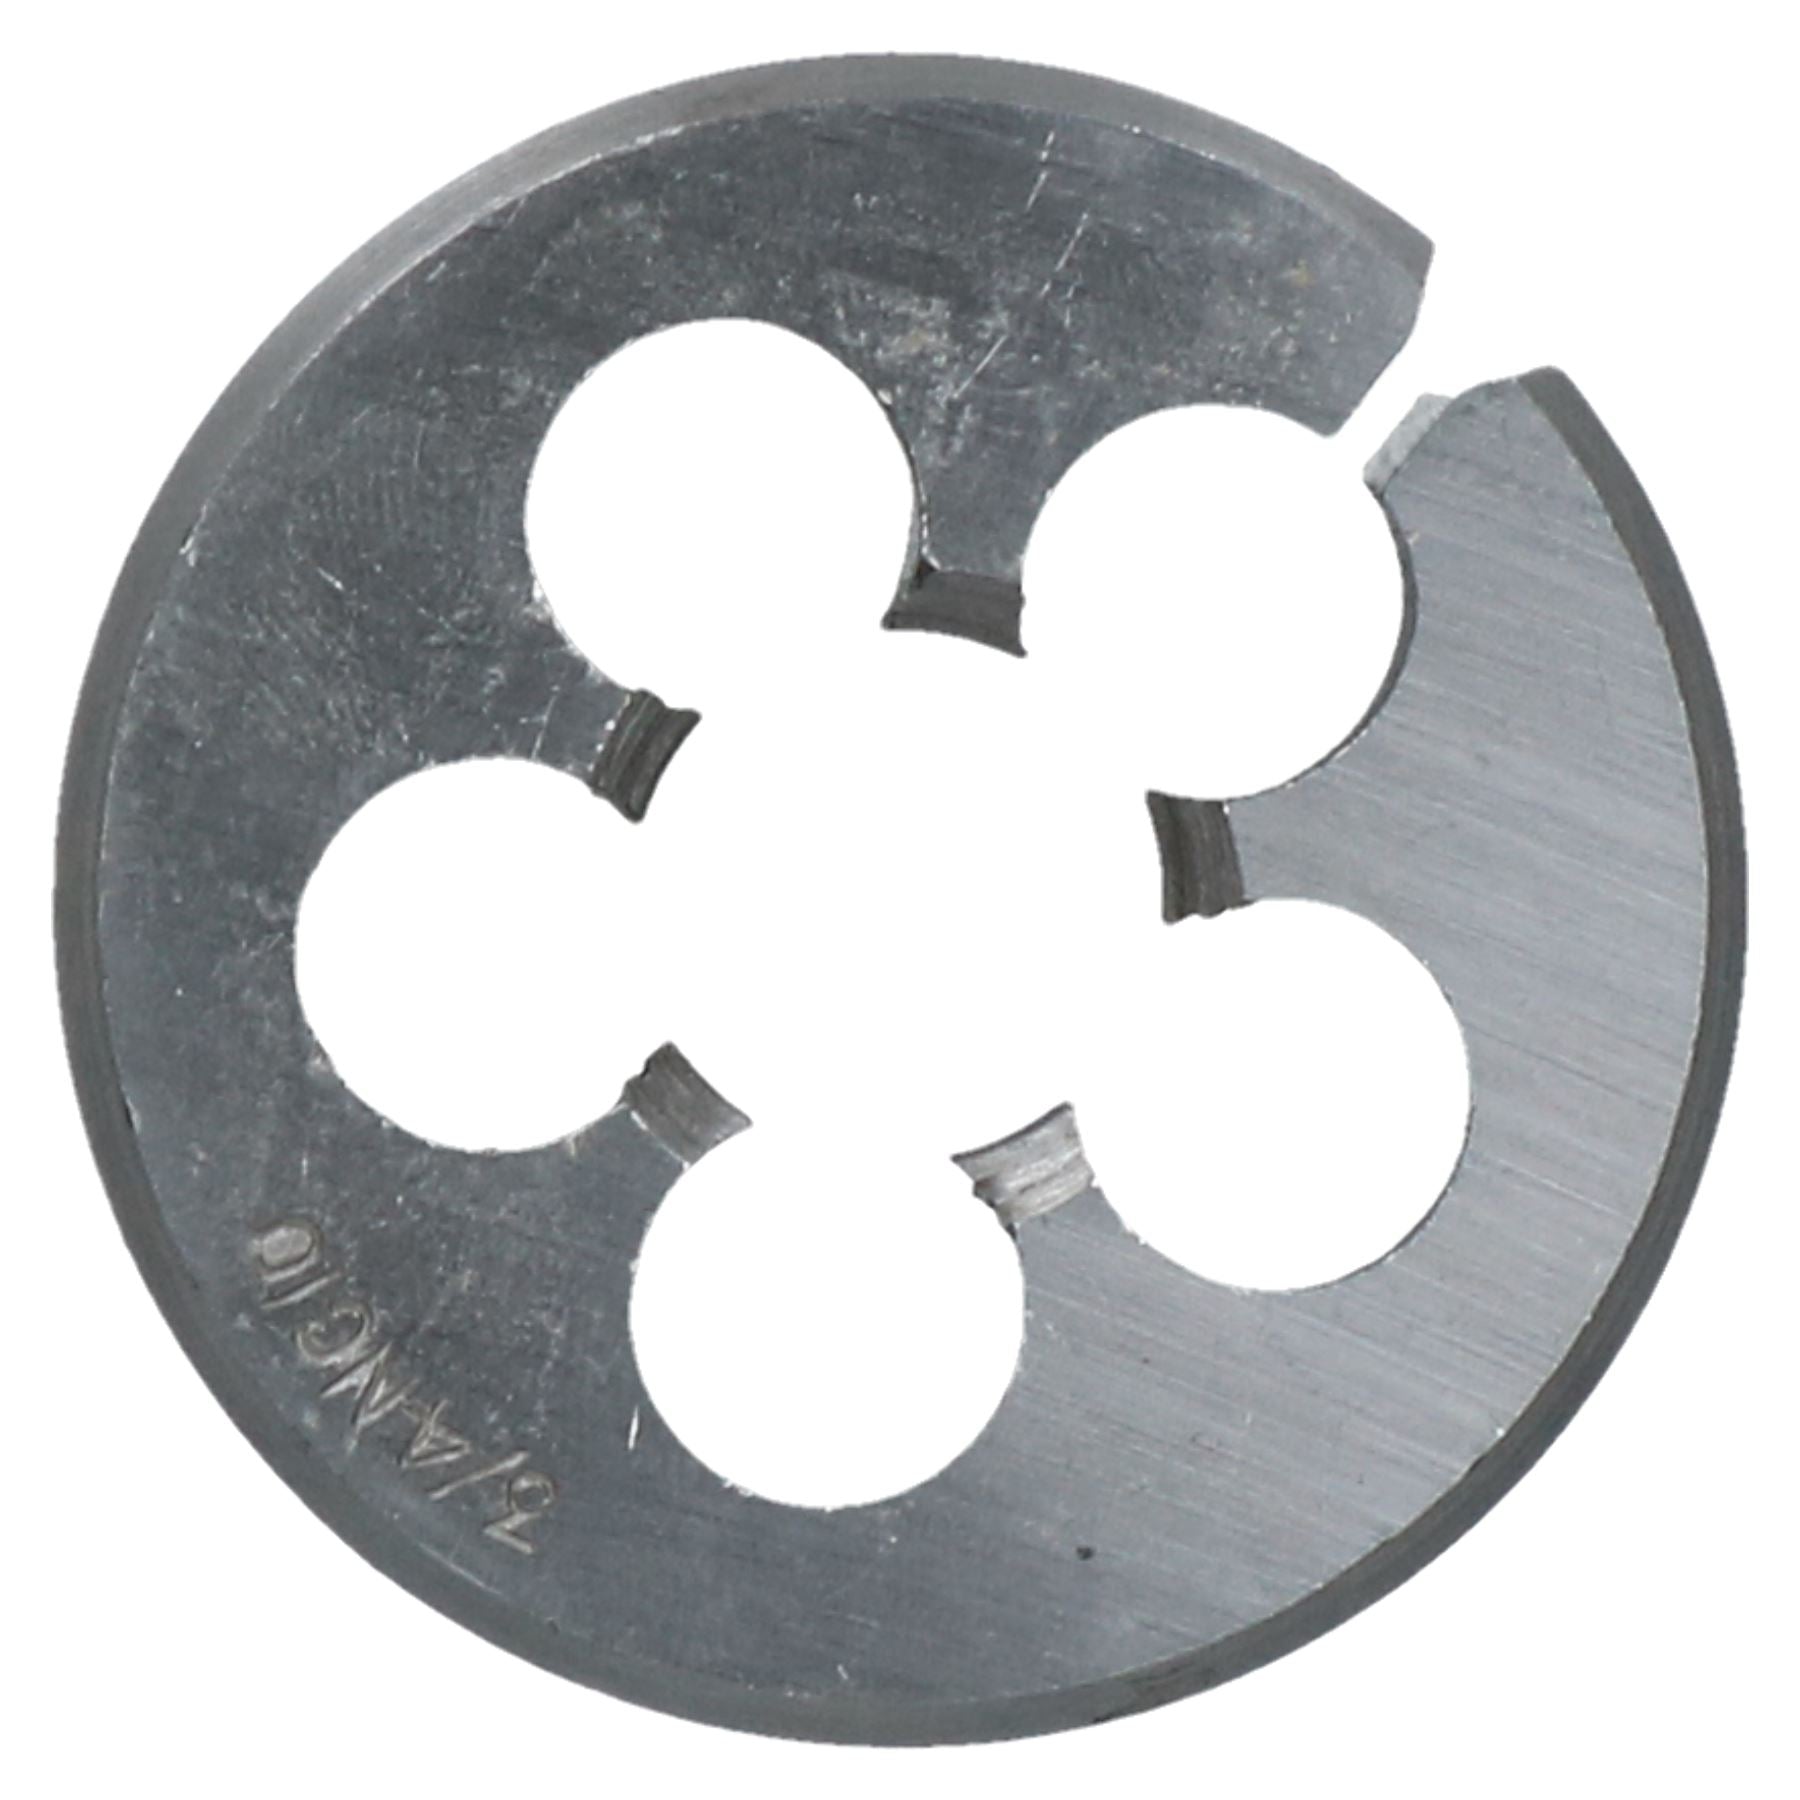 50mm UNC Imperial Die from 3/4" - 1"